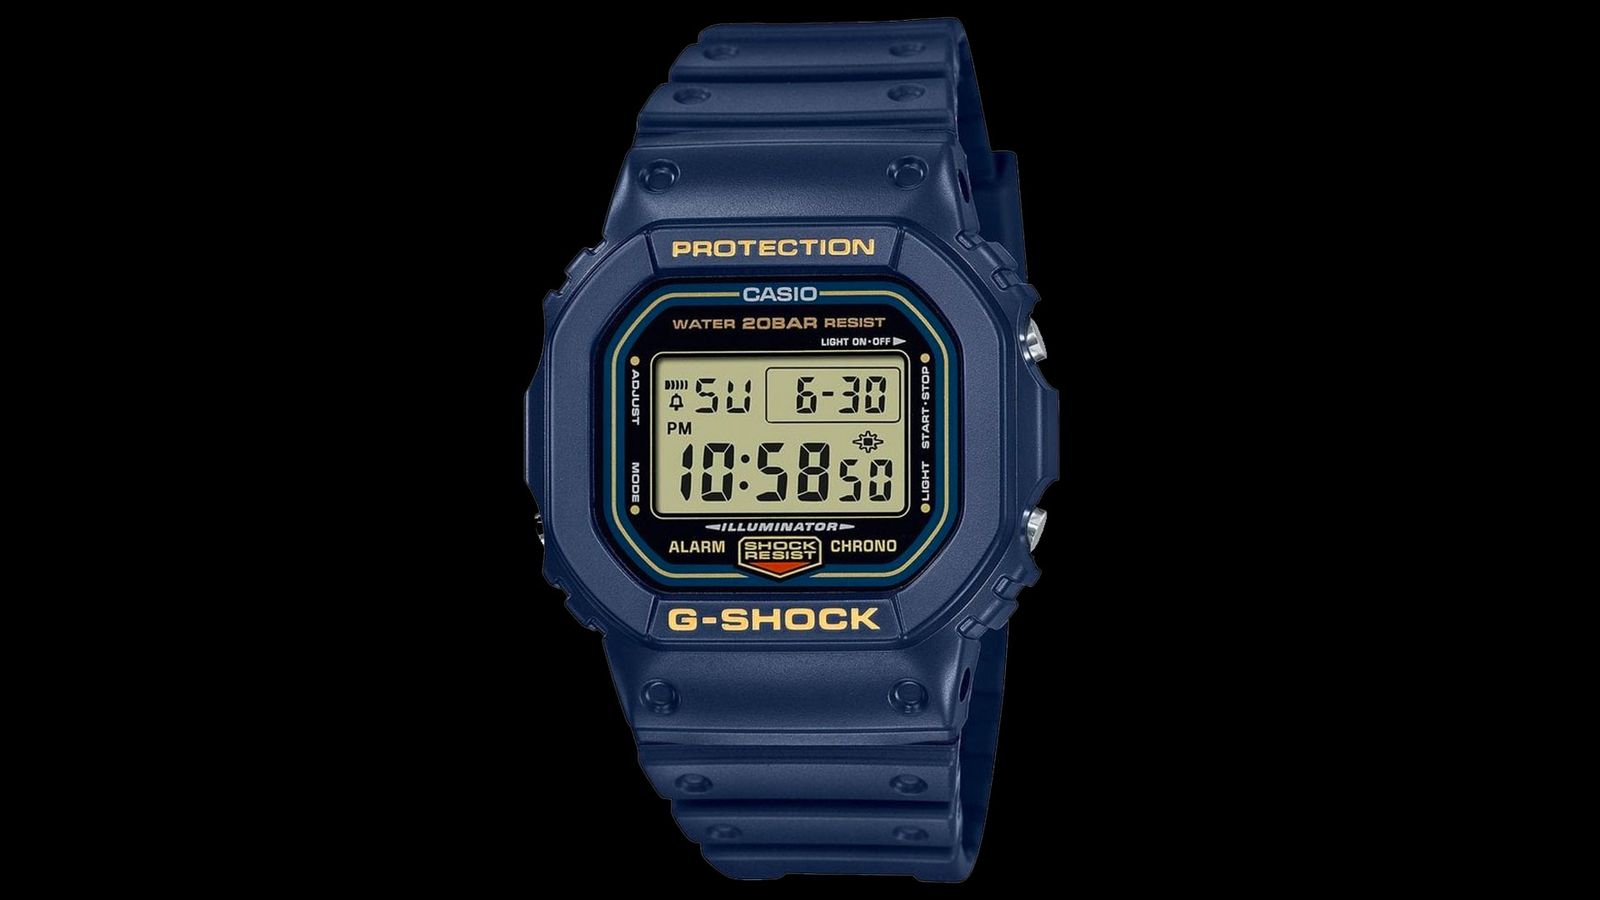 G-SHOCK Revival Colour Series DW-5600RB-2ER product image of a dark blue resin digital watch.